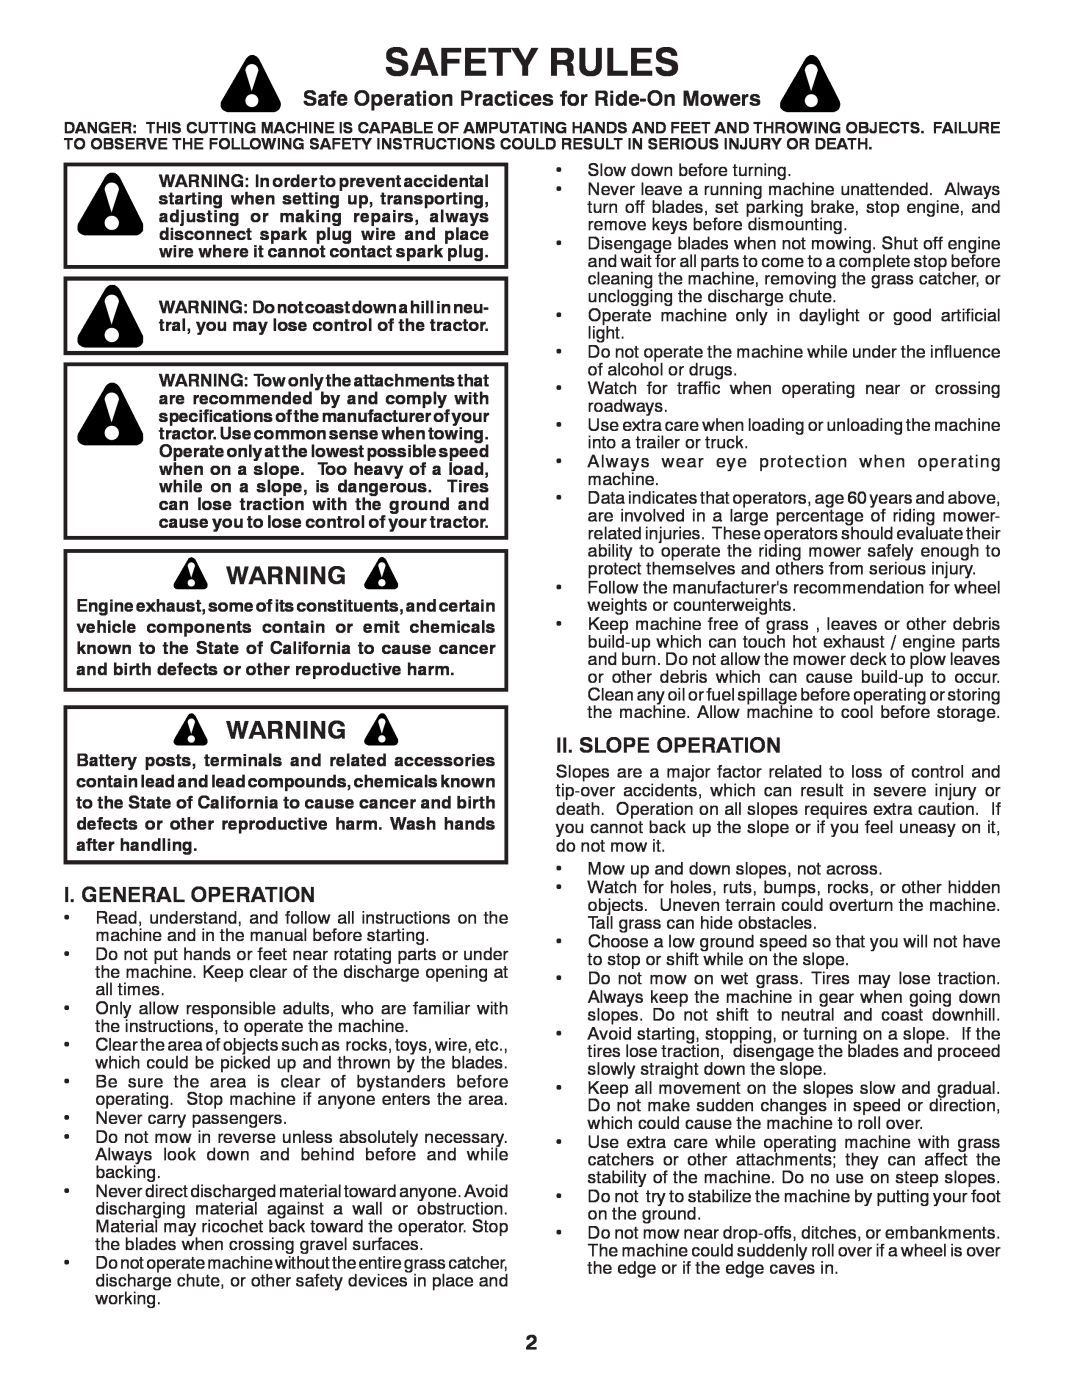 Poulan 532 43 88-78 Safety Rules, Safe Operation Practices for Ride-On Mowers, I. General Operation, Ii. Slope Operation 